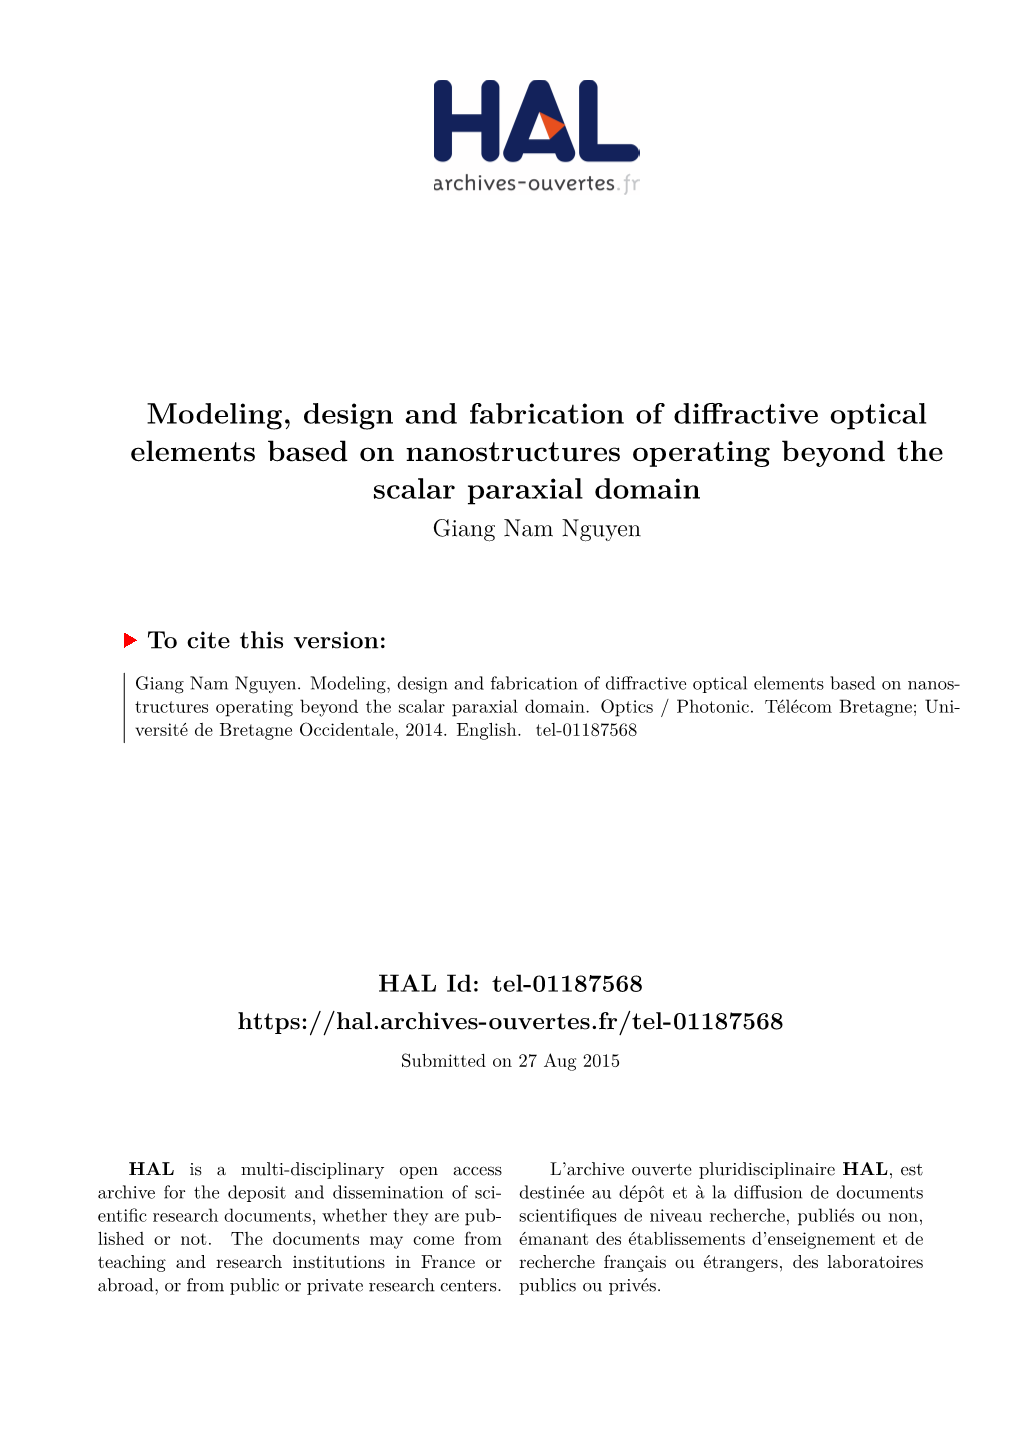 Modeling, Design and Fabrication of Diffractive Optical Elements Based on Nanostructures Operating Beyond the Scalar Paraxial Domain Giang Nam Nguyen